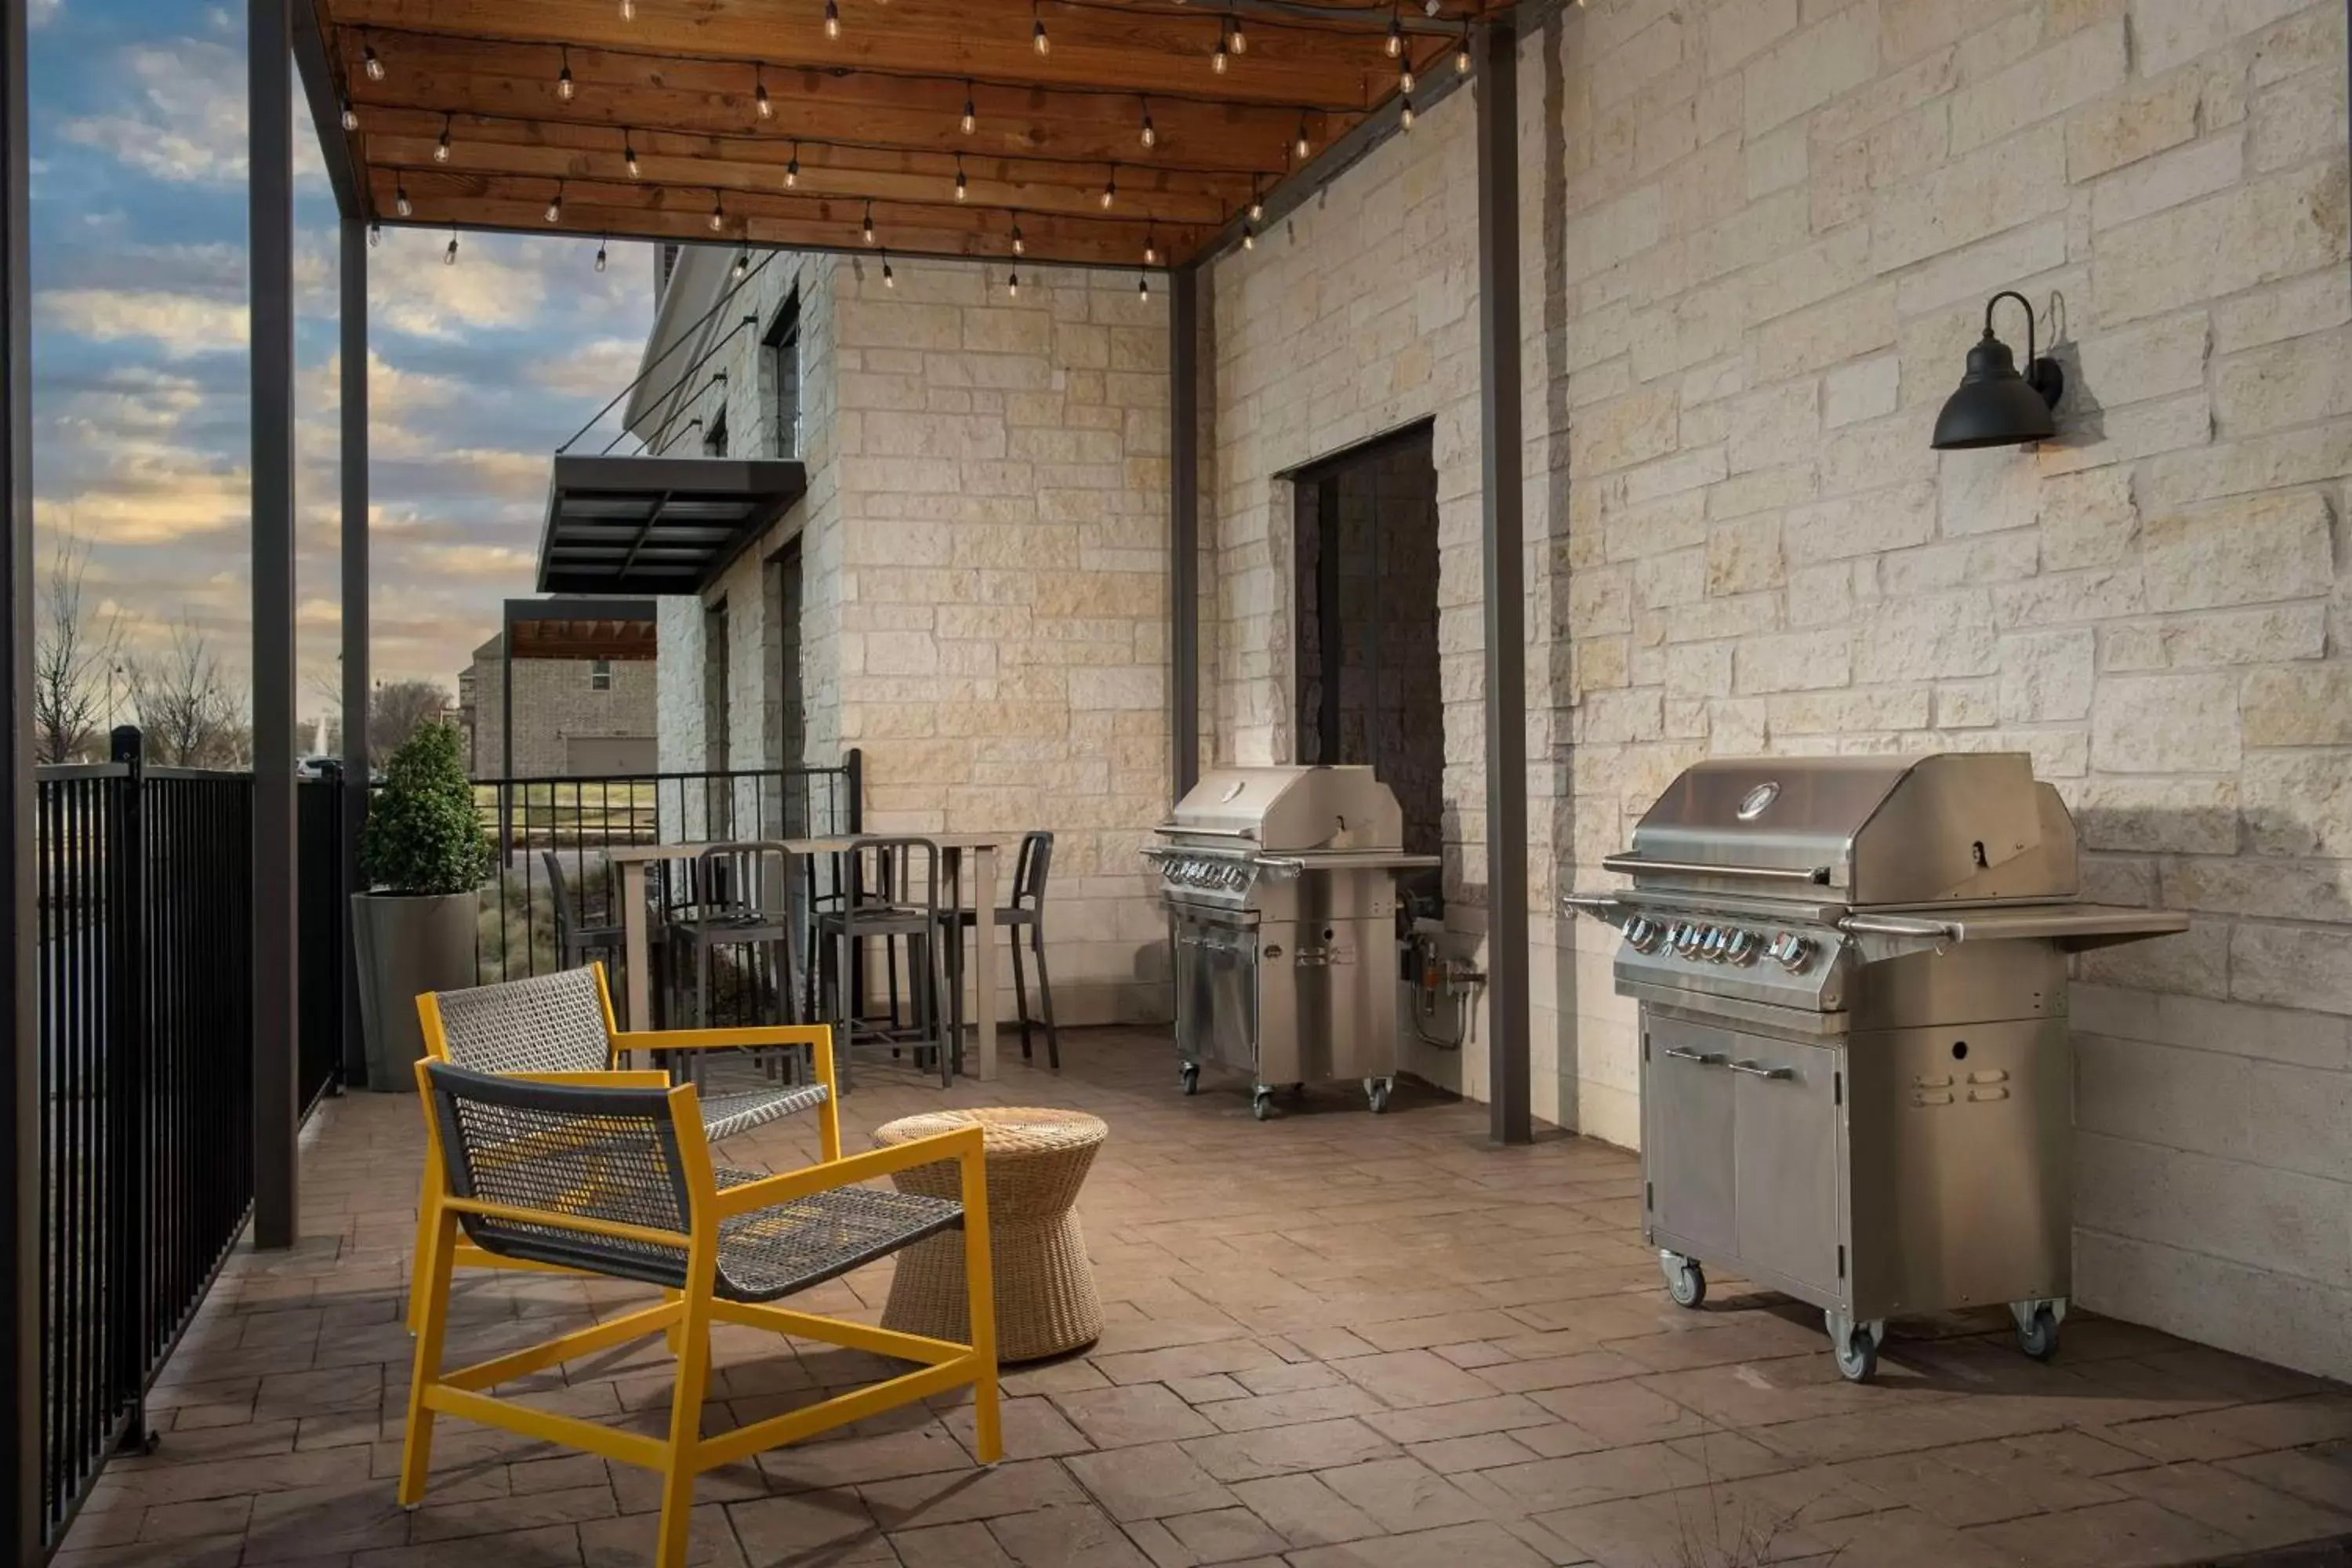 Dining area, BBQ Facilities in Home2 Suites By Hilton Flower Mound Dallas